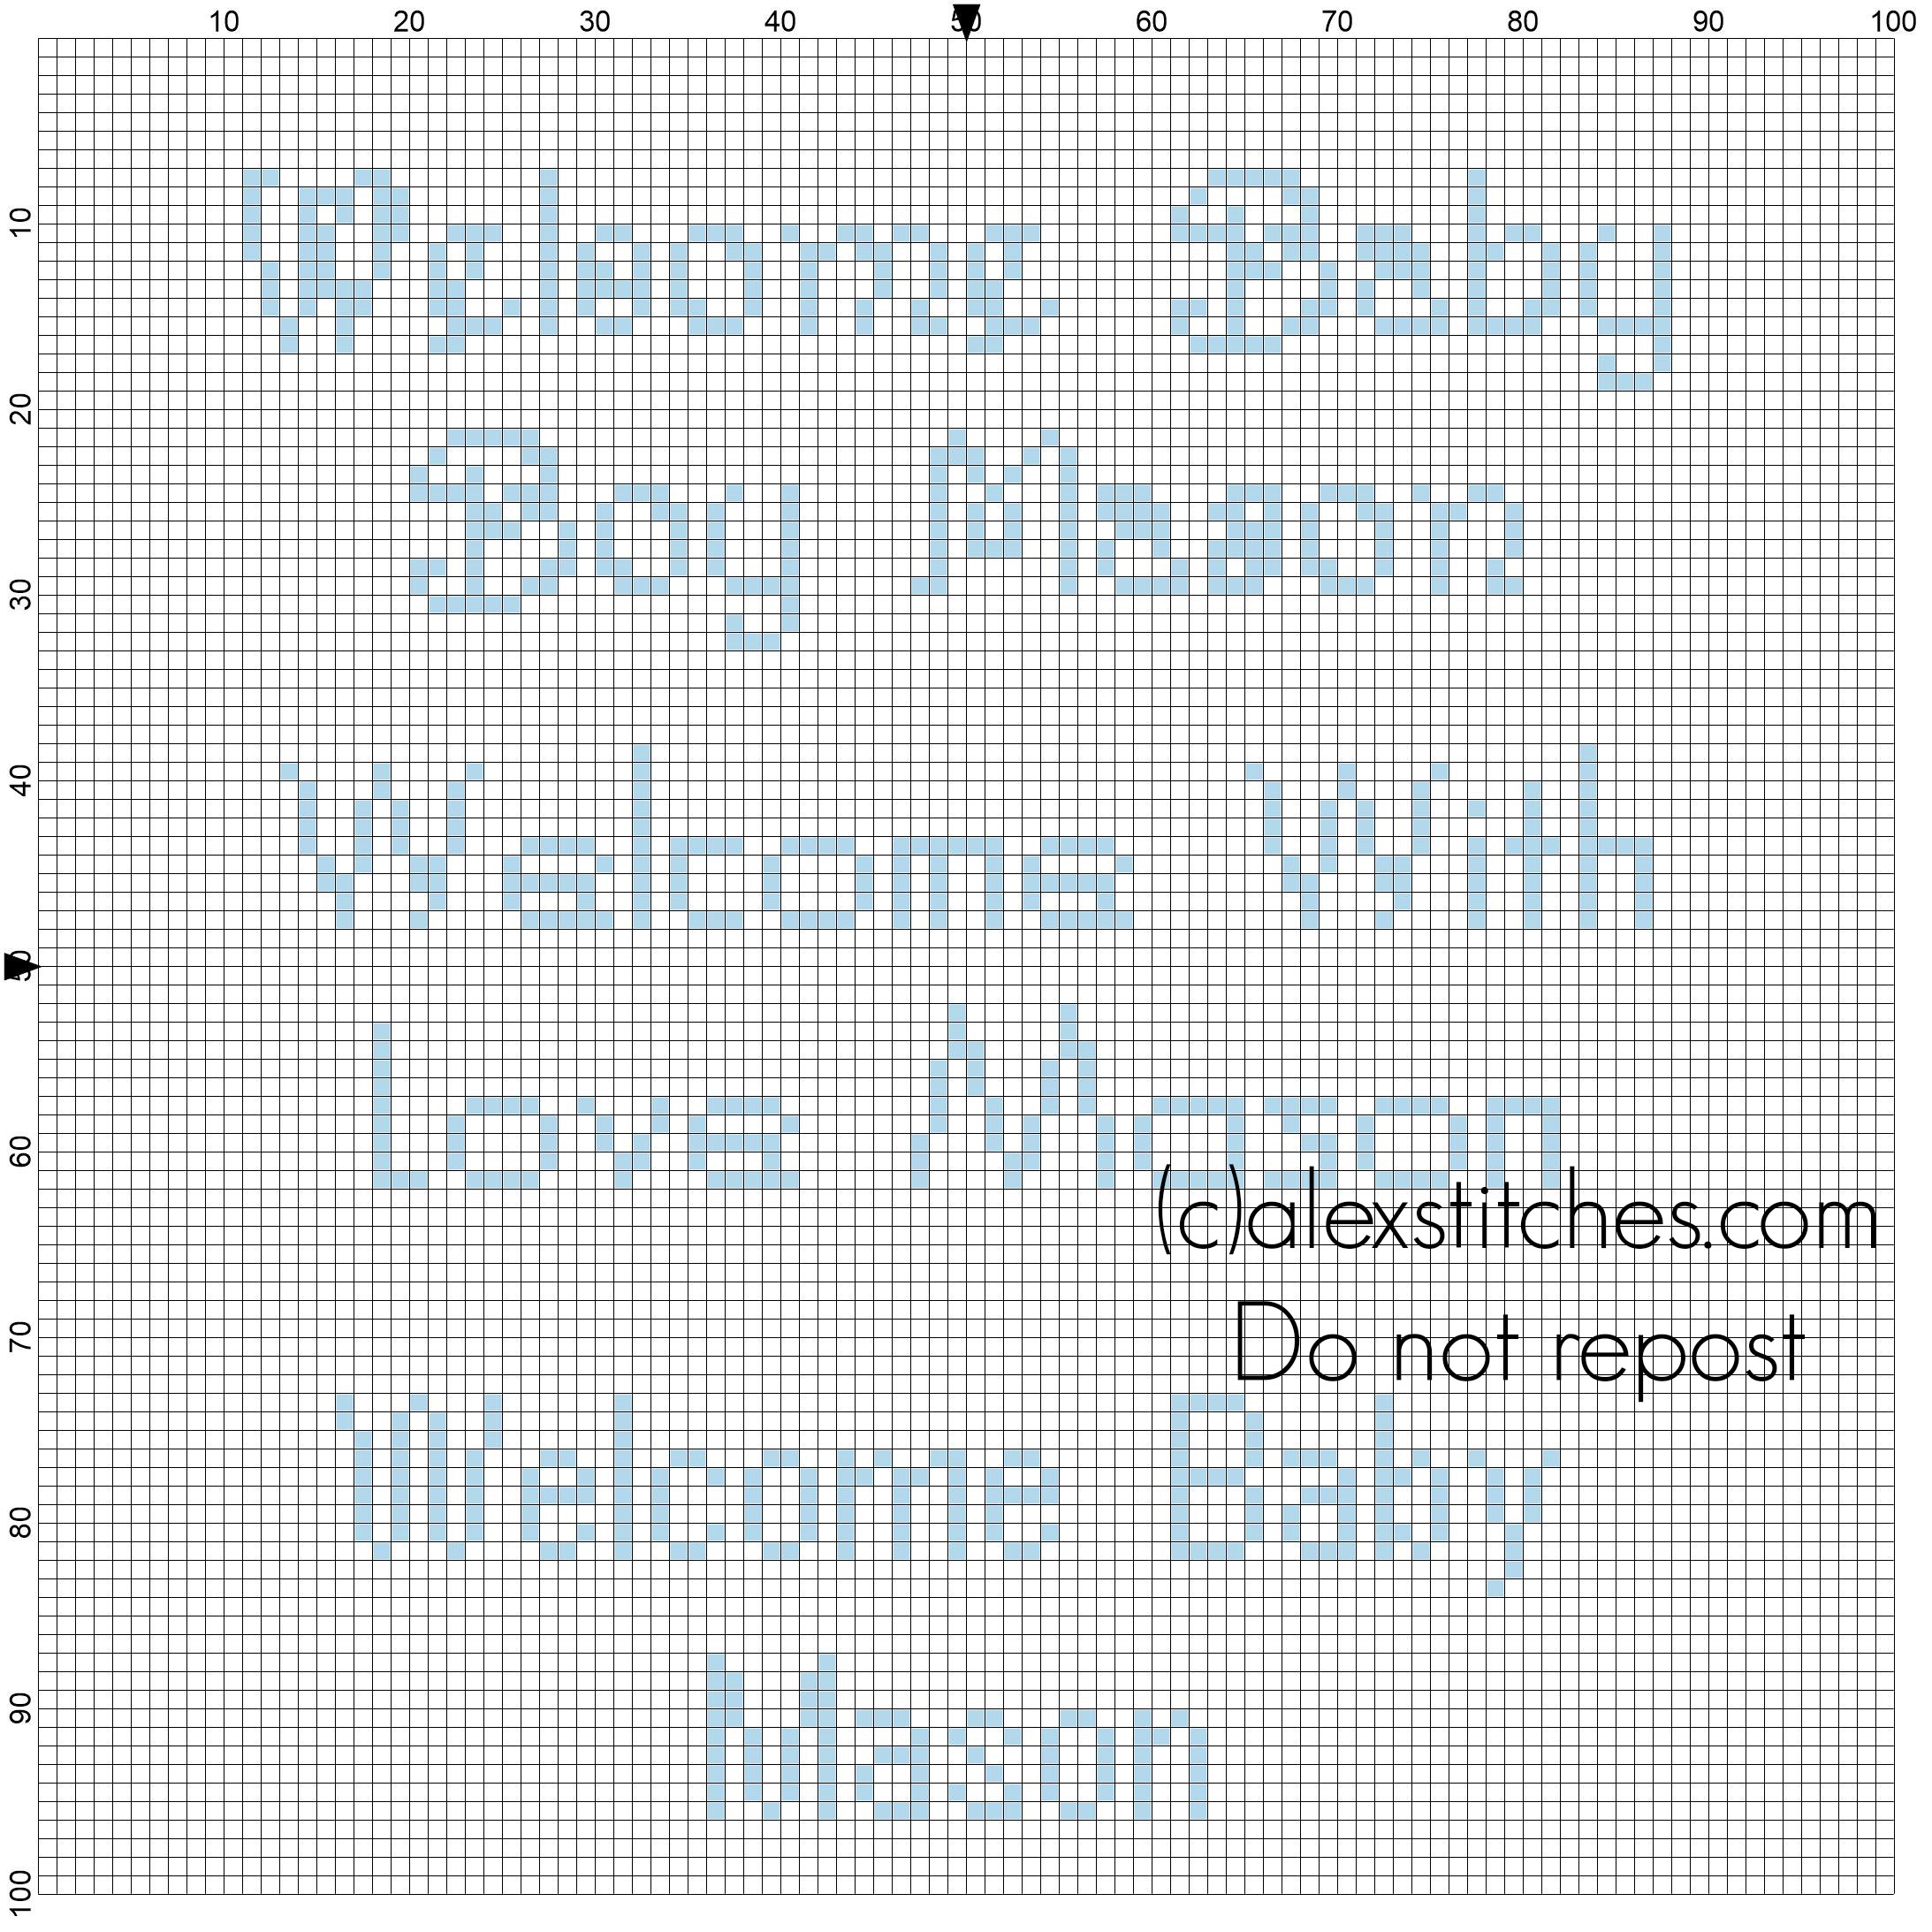 Welcome Baby Boy Mason cross stitch pattern text for birth records